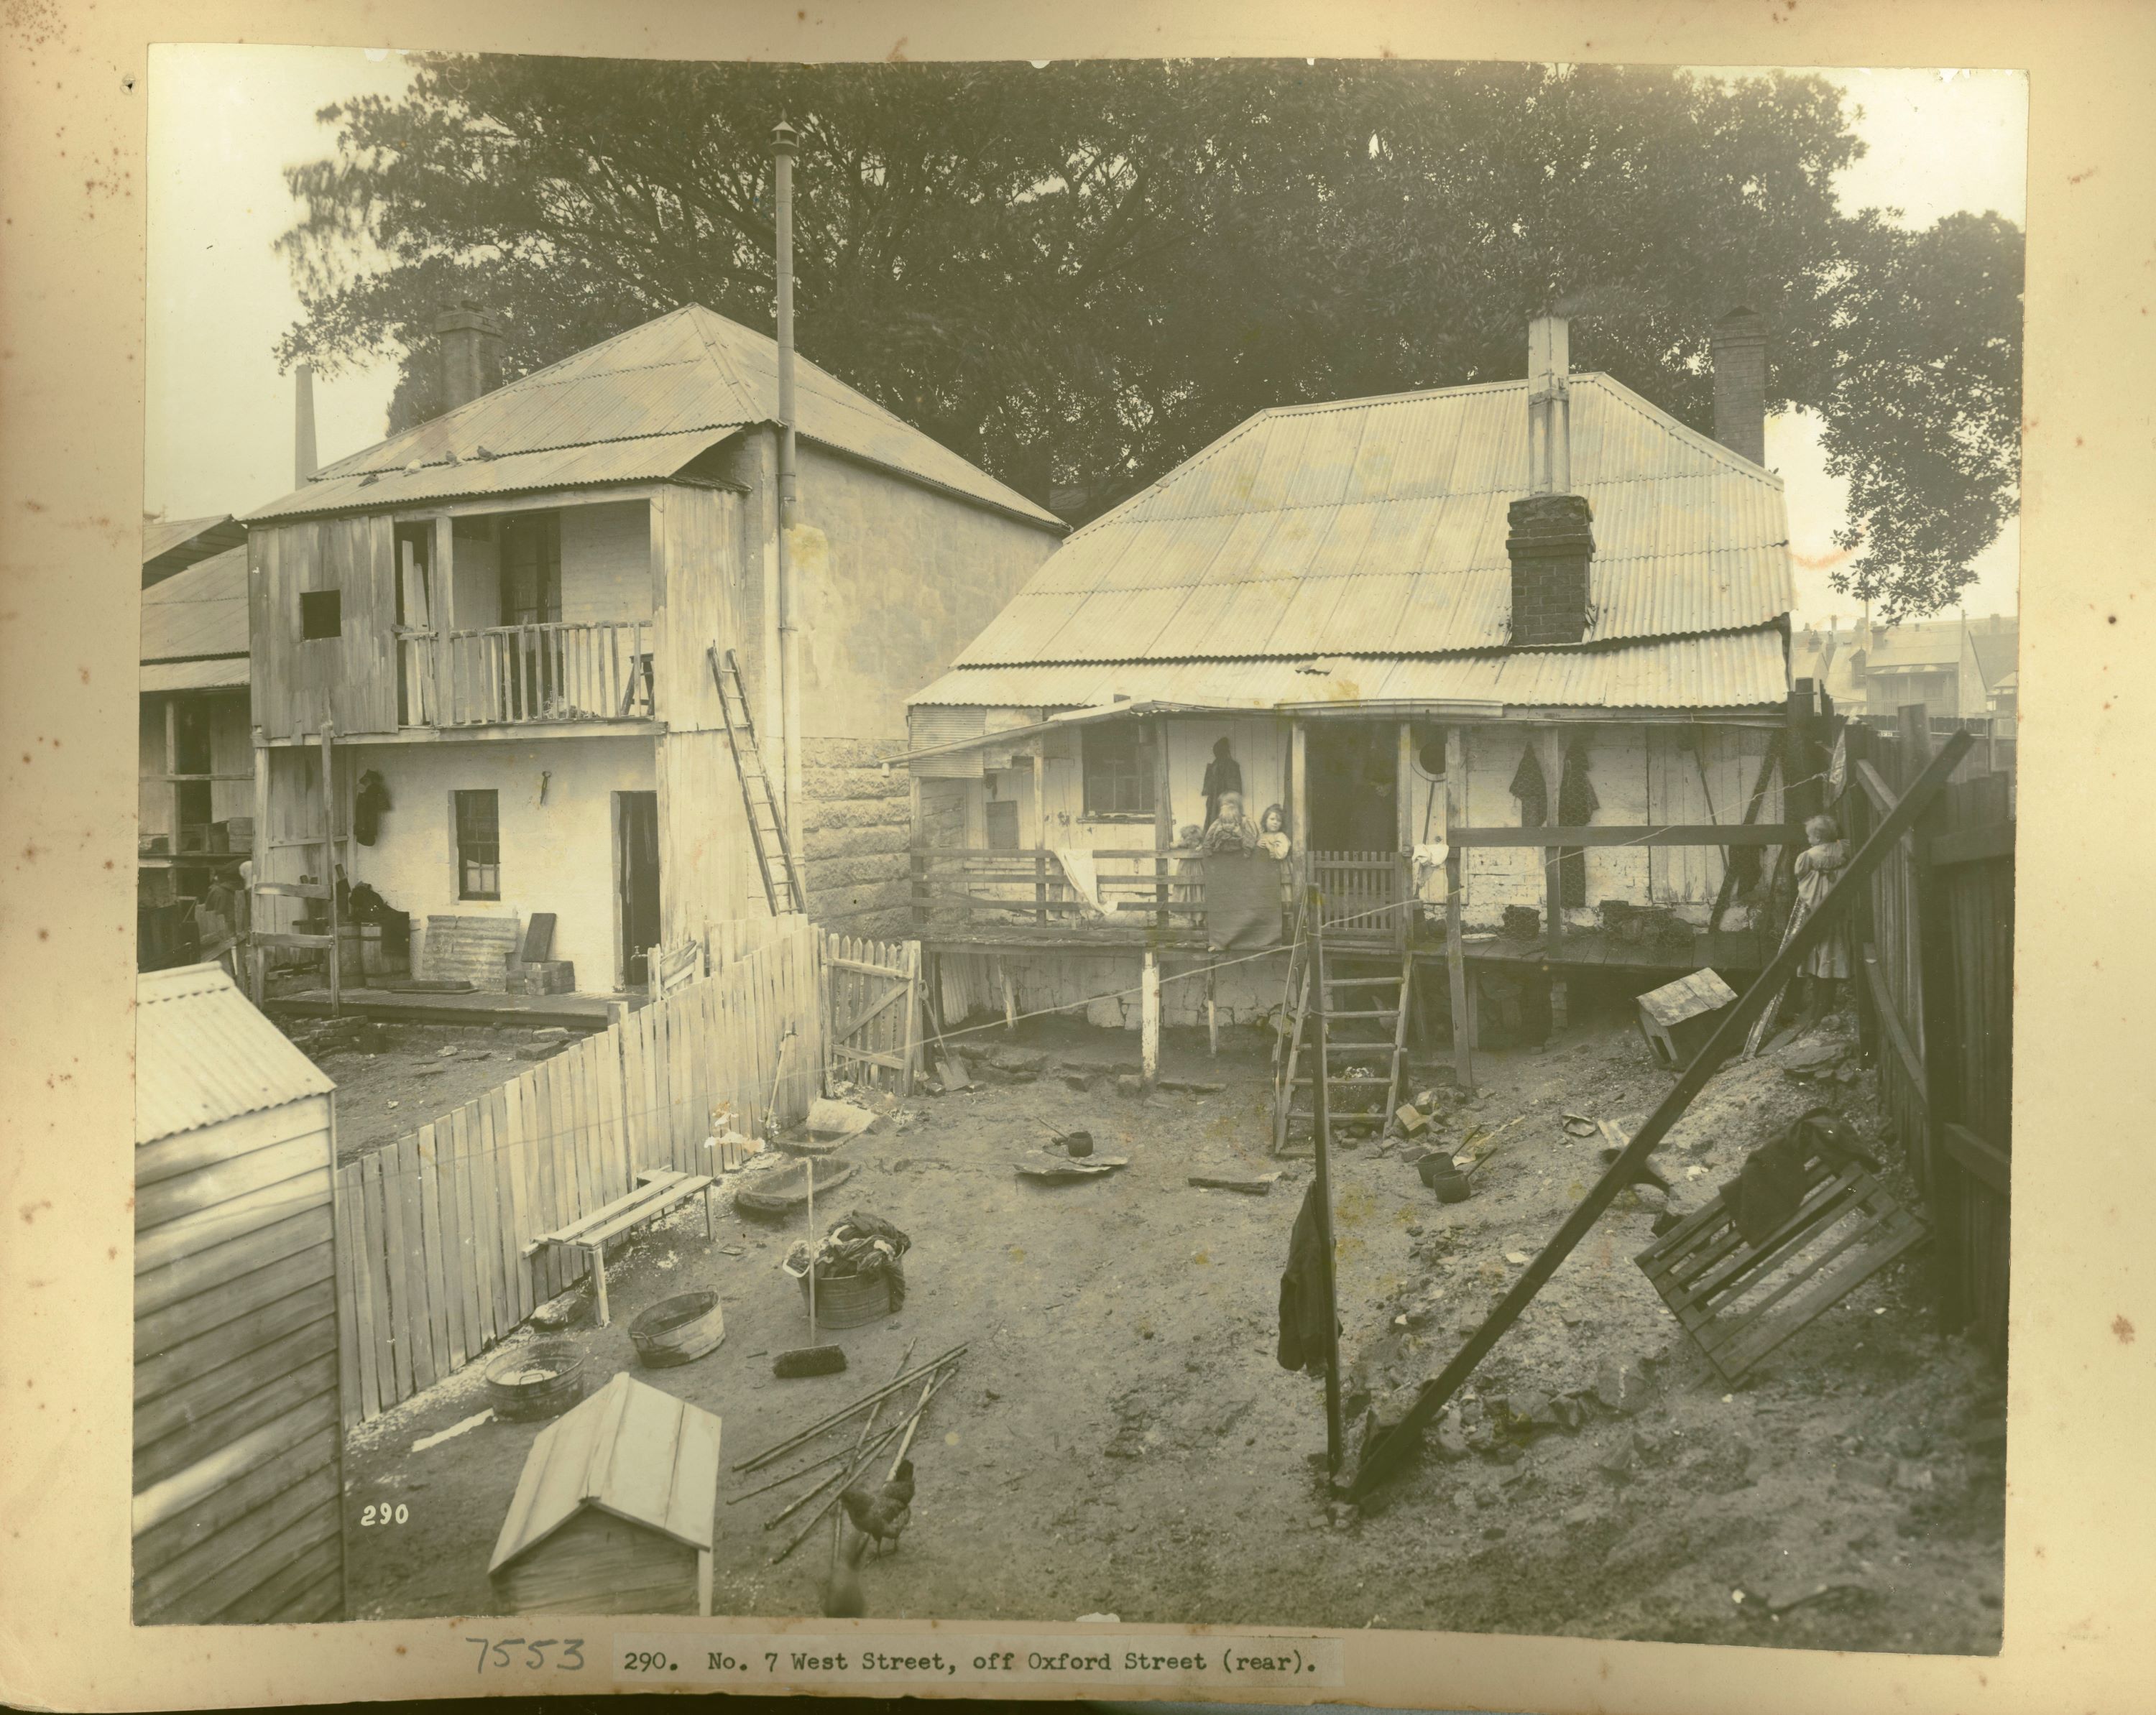 A group of children stand on the balcony of a wooden cottage looking over a muddy yard strewn with pots and cleaning tools. A crooked set of wooden steps leads to the balcony